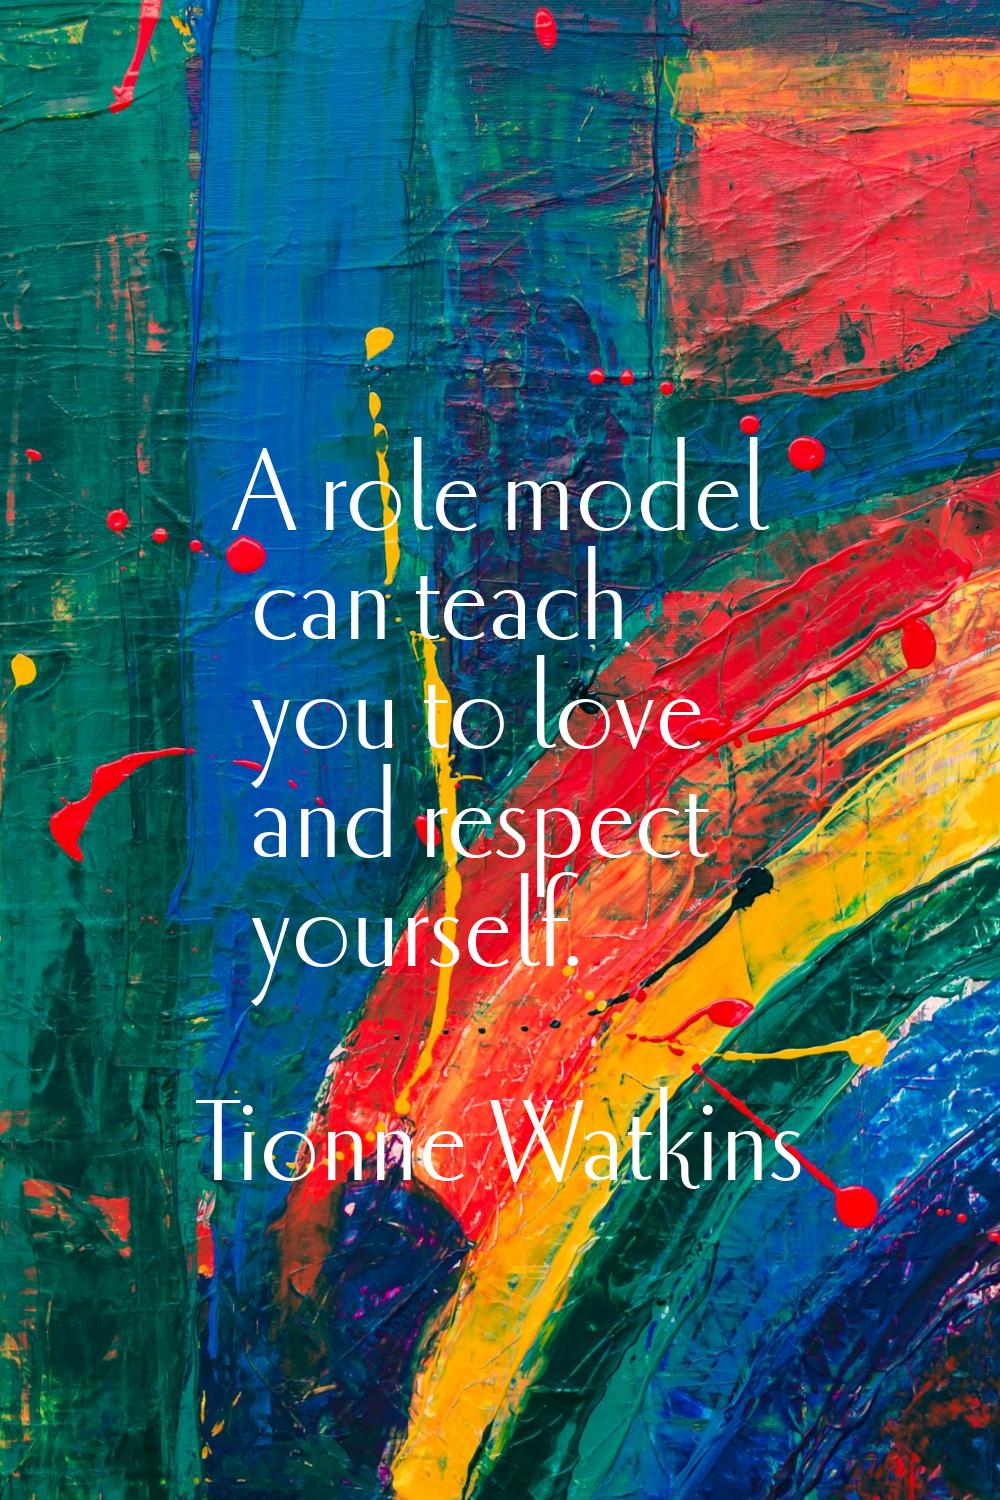 A role model can teach you to love and respect yourself.